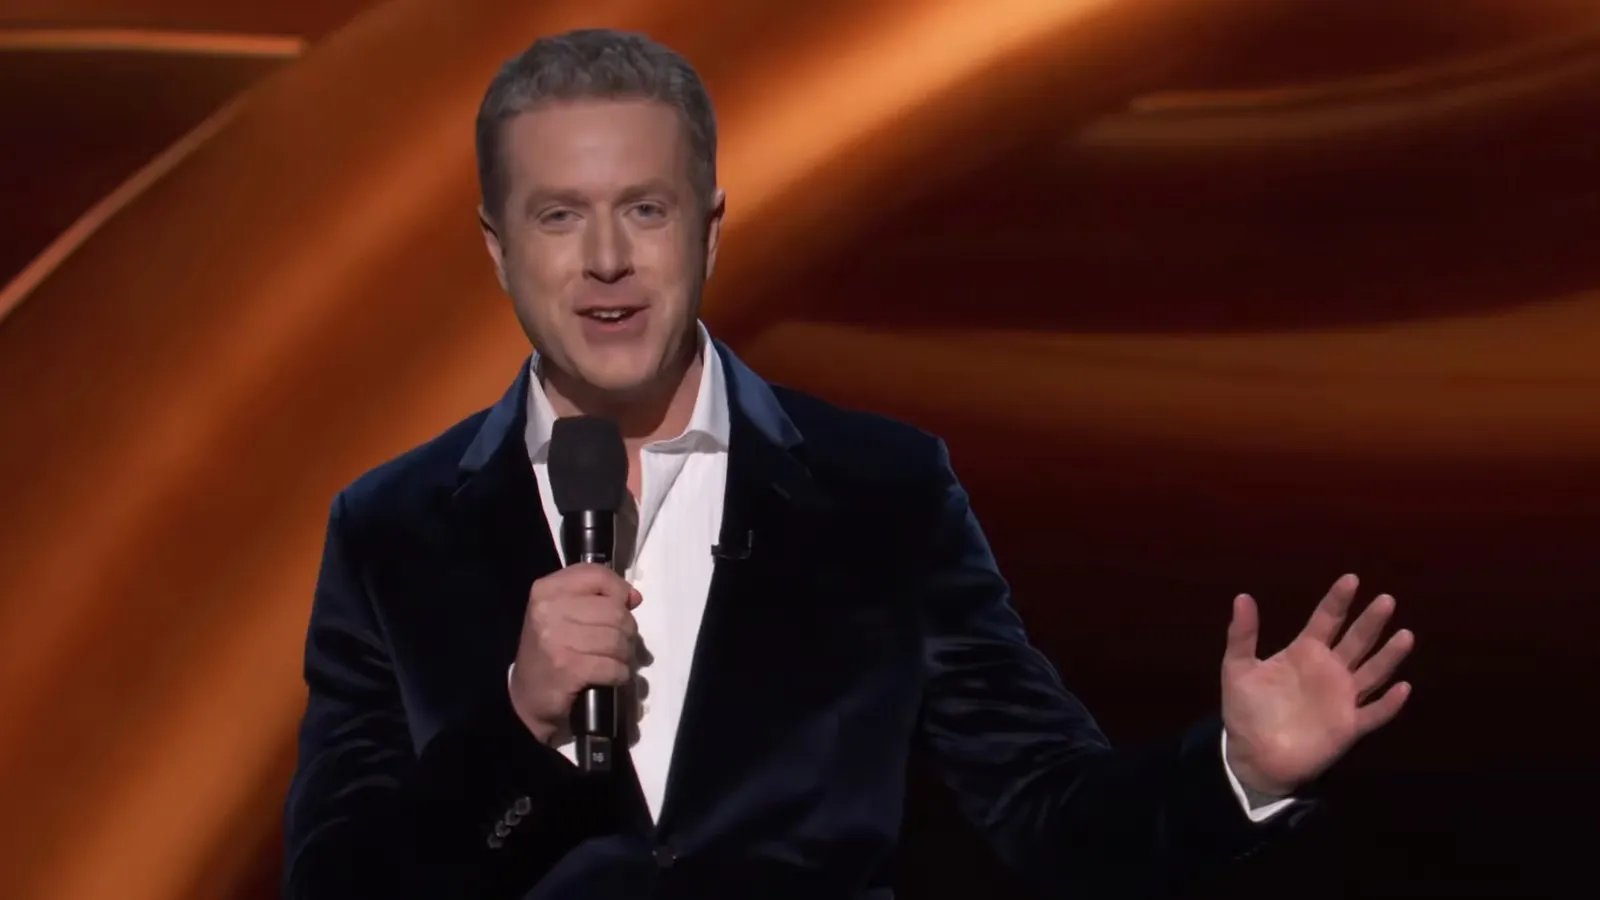 The Game Awards security will be tightened to prevent another stage  invasion, Geoff Keighley says